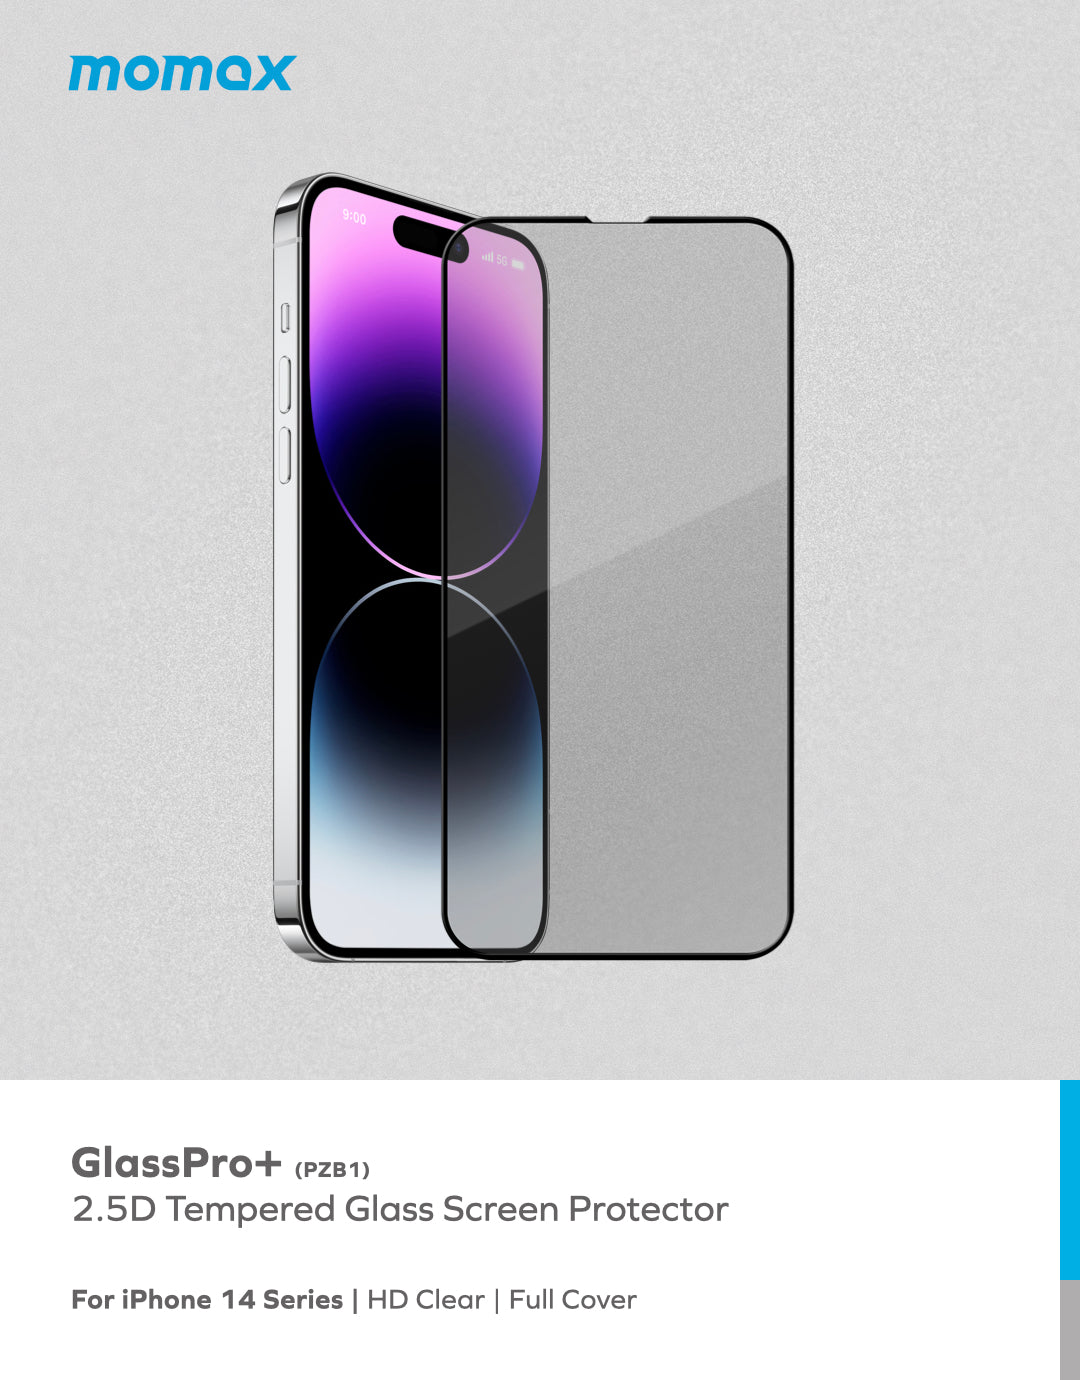 GlassPro+ | 2.5D Tempered Glass Screen Protector for iPhone 14 Series